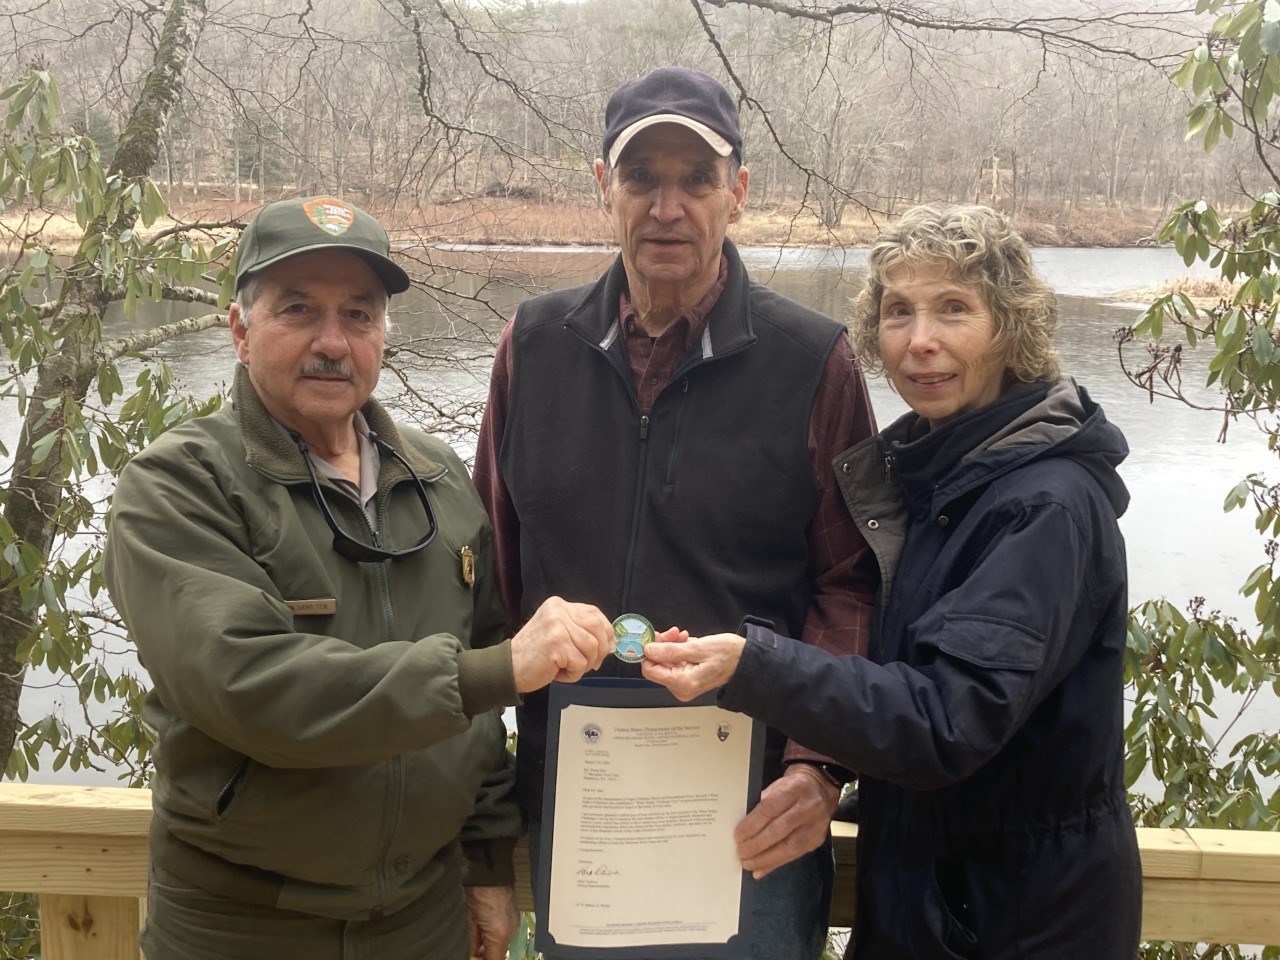 three people standing together. On left is park ranger wearing green. In center is tall man in ball cap and vest. On right is woman with blond, curly hair. Man on left and woman hold a large decorative medallion in the center. Man in center holds letter.